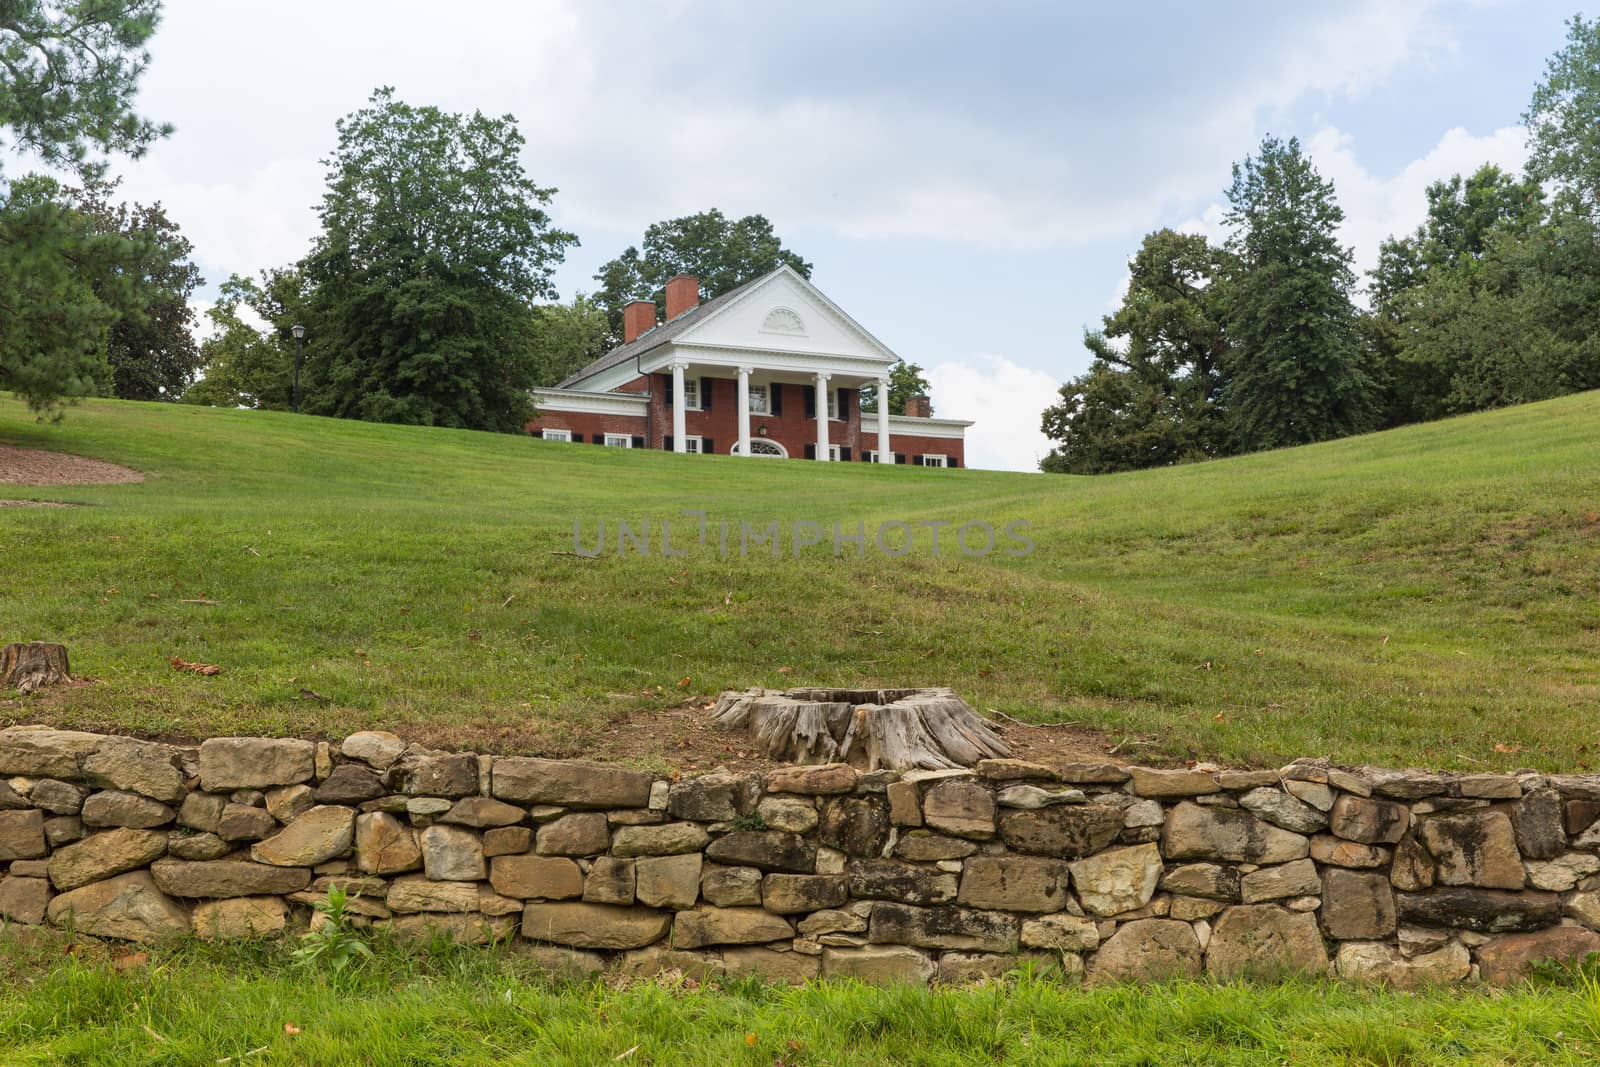 Marye's House on top of Marye's Heights was the center of the Confederate position during the Battle of Fredricksburg.